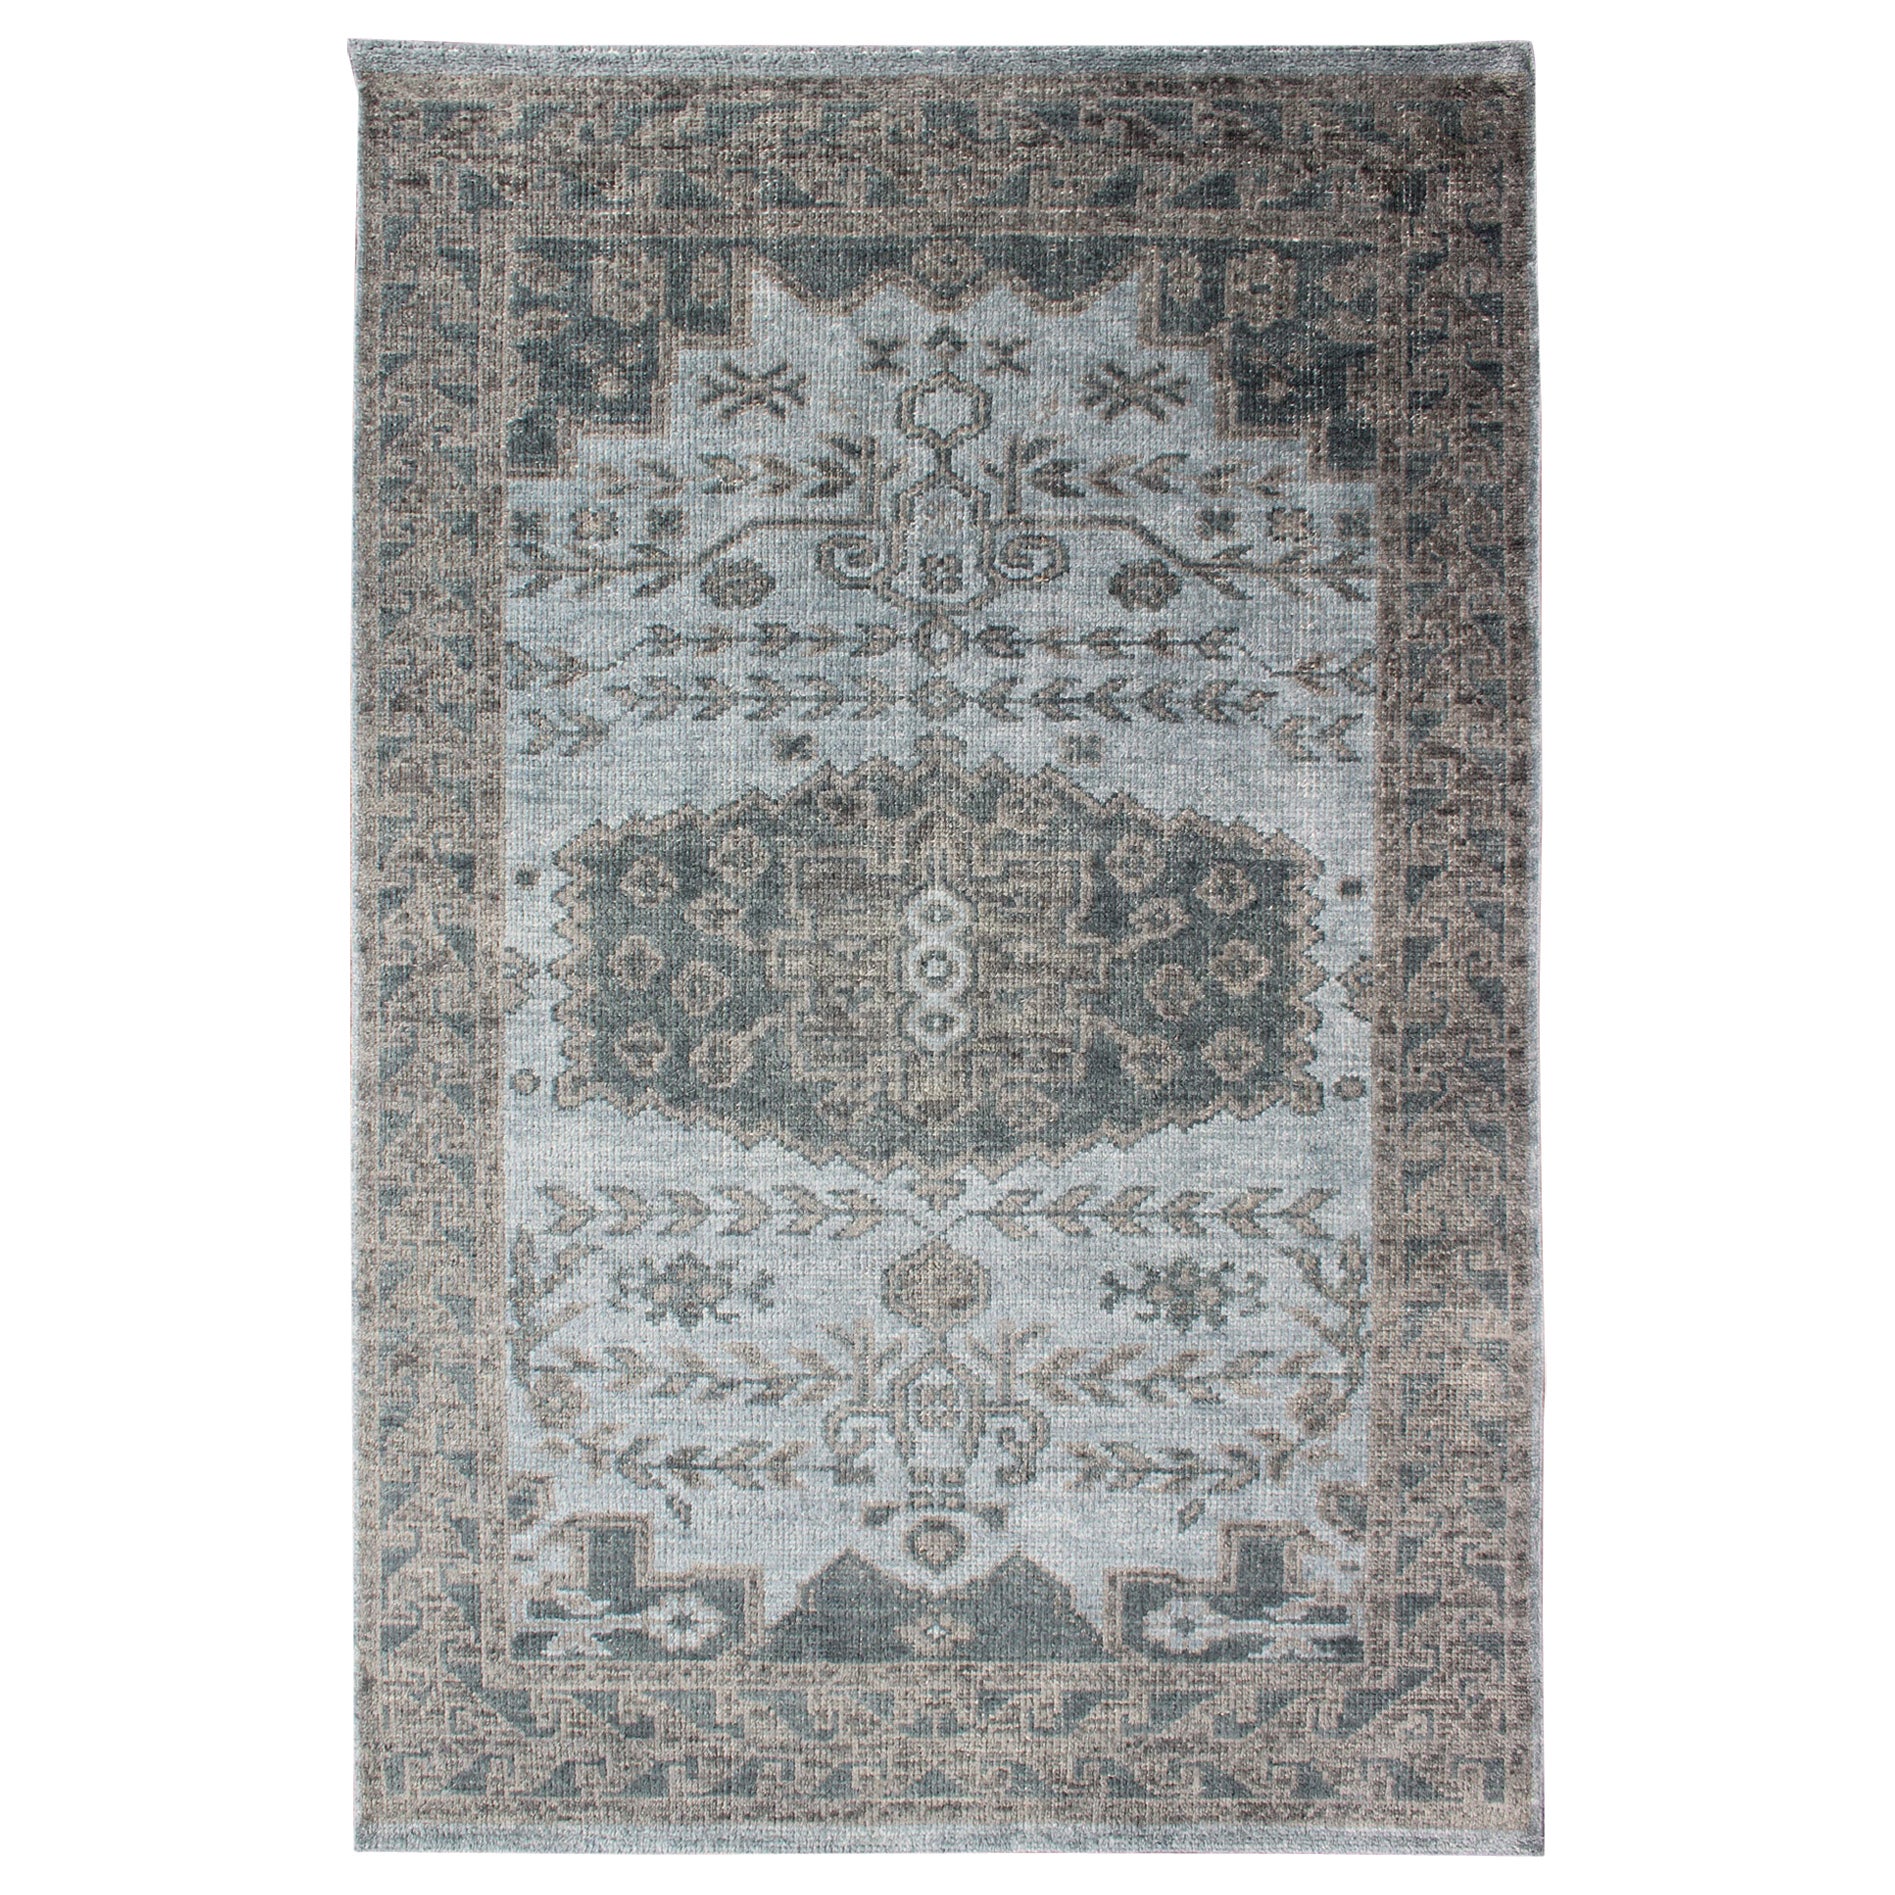 Oushak Design Distressed Rug in Gray, Taupe, & Cream with large Medallion Design